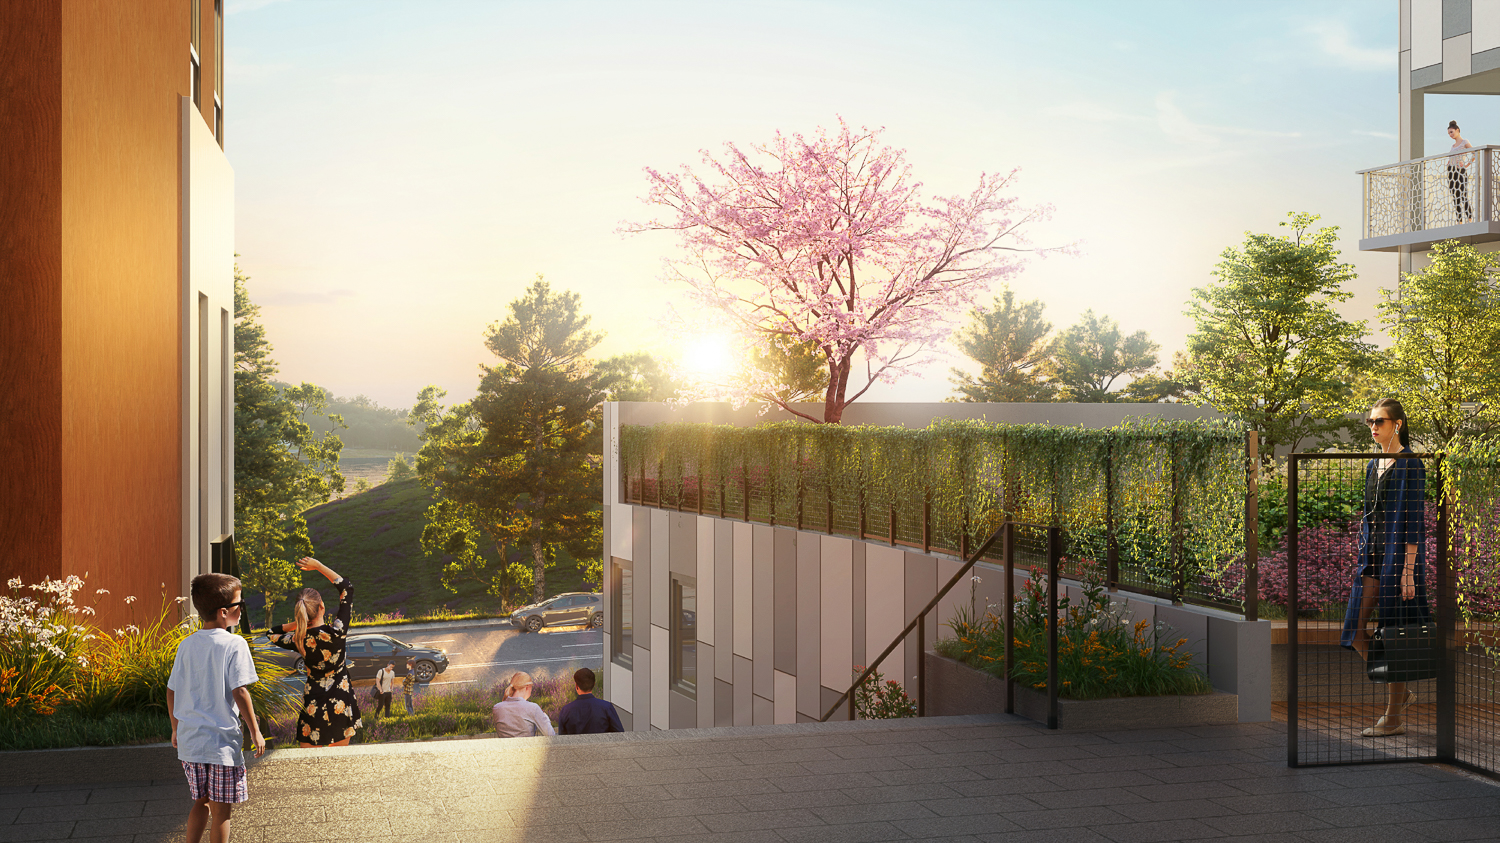 99 Higuera Avenue landscaping area, rendering by BDE Architecture